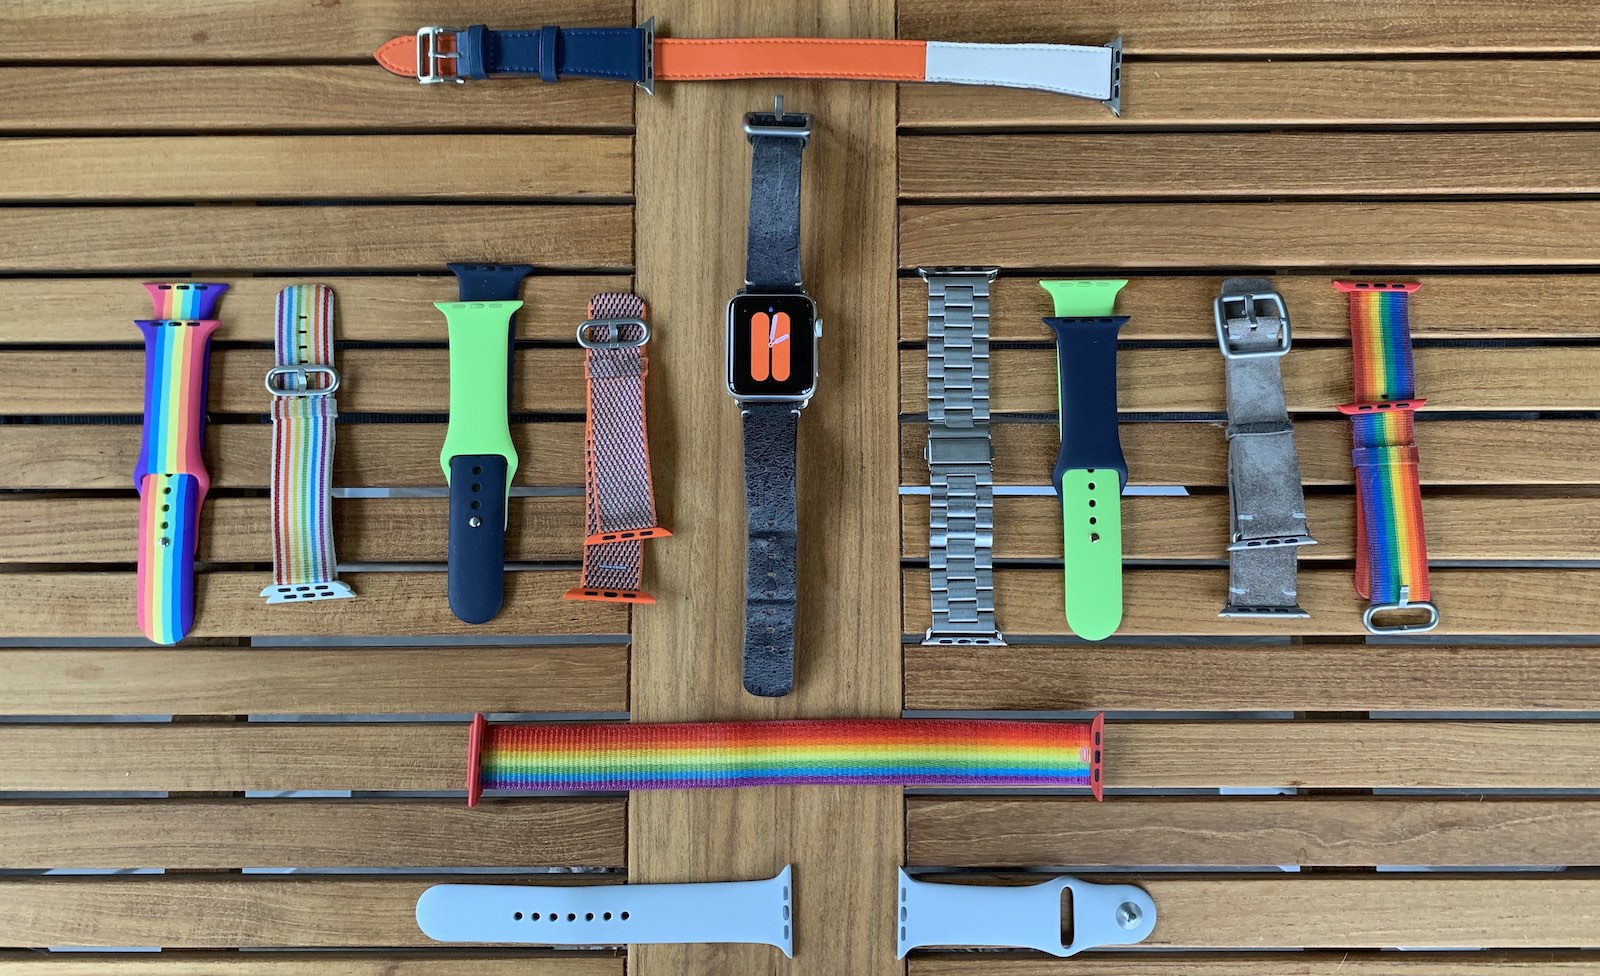 Watch bands, so many watch bands